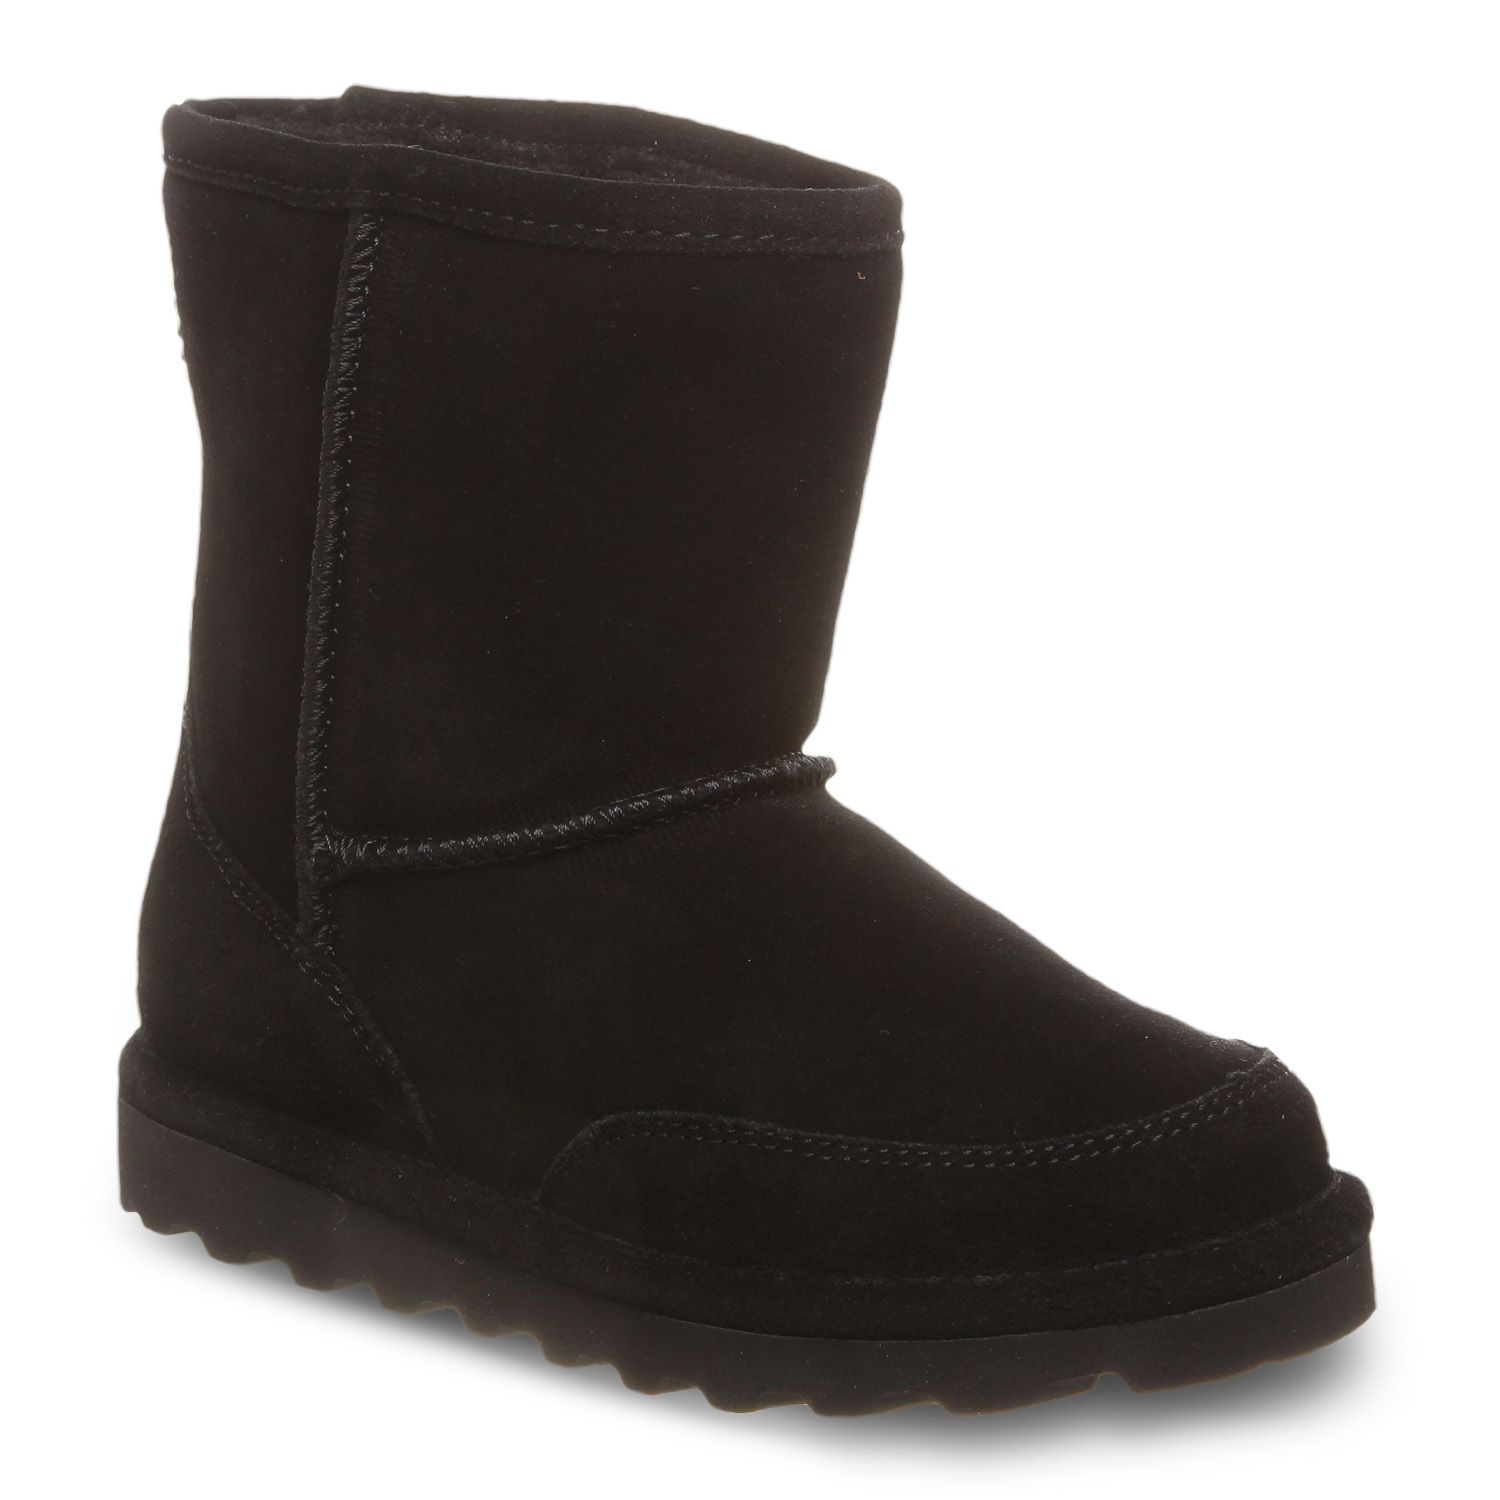 bearpaw boots at kohl's